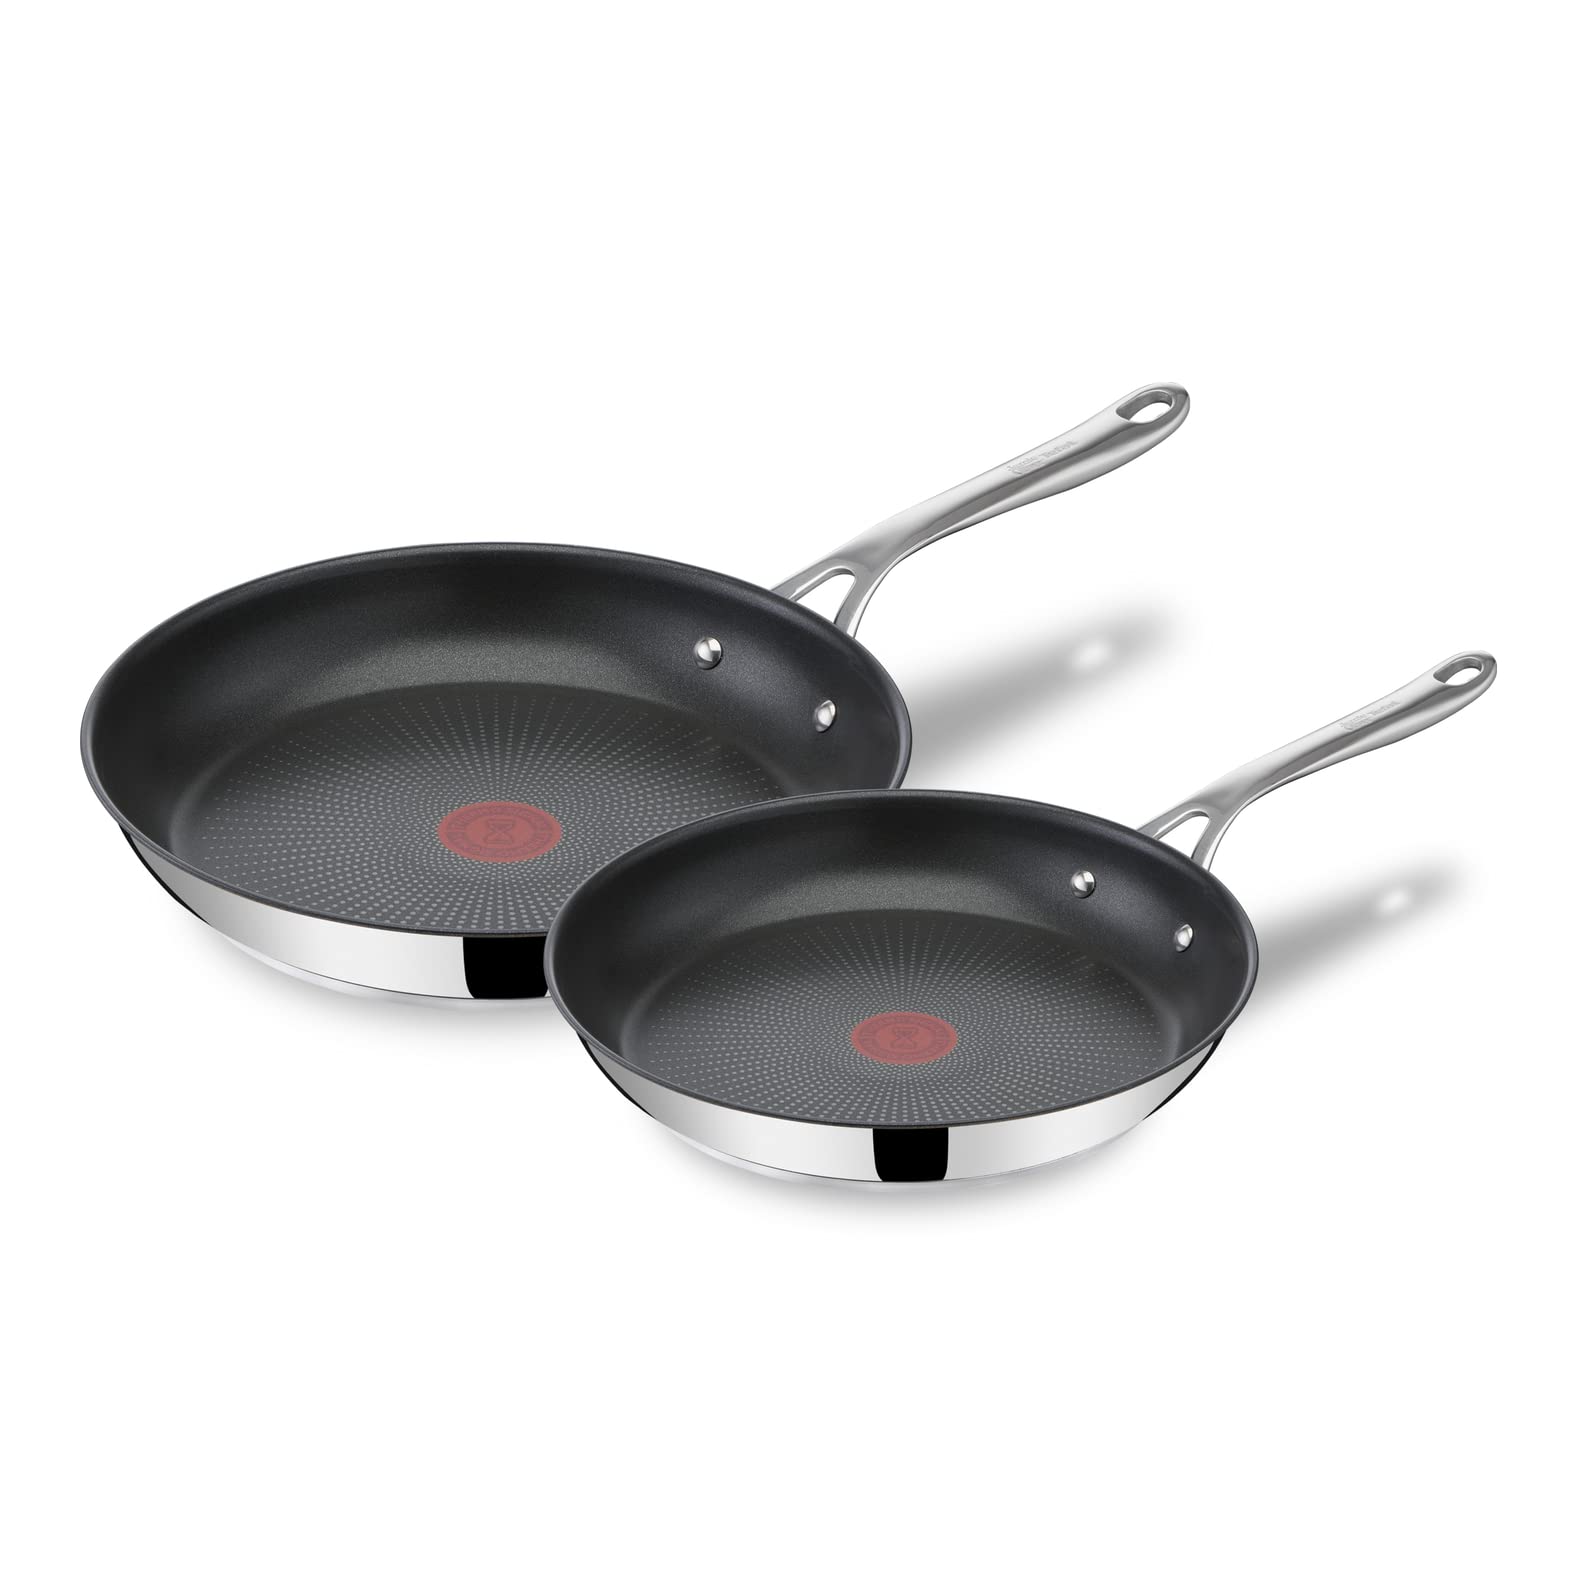 Tefal Jamie Oliver Cook's Direct Stainless Steel, 2 Piece Frying Pan Set, 24 & 28cm, Non-Stick Coating, Heat Indicator, Riveted Safe-Grip Handle, Induction Hob Compatible, E304S244